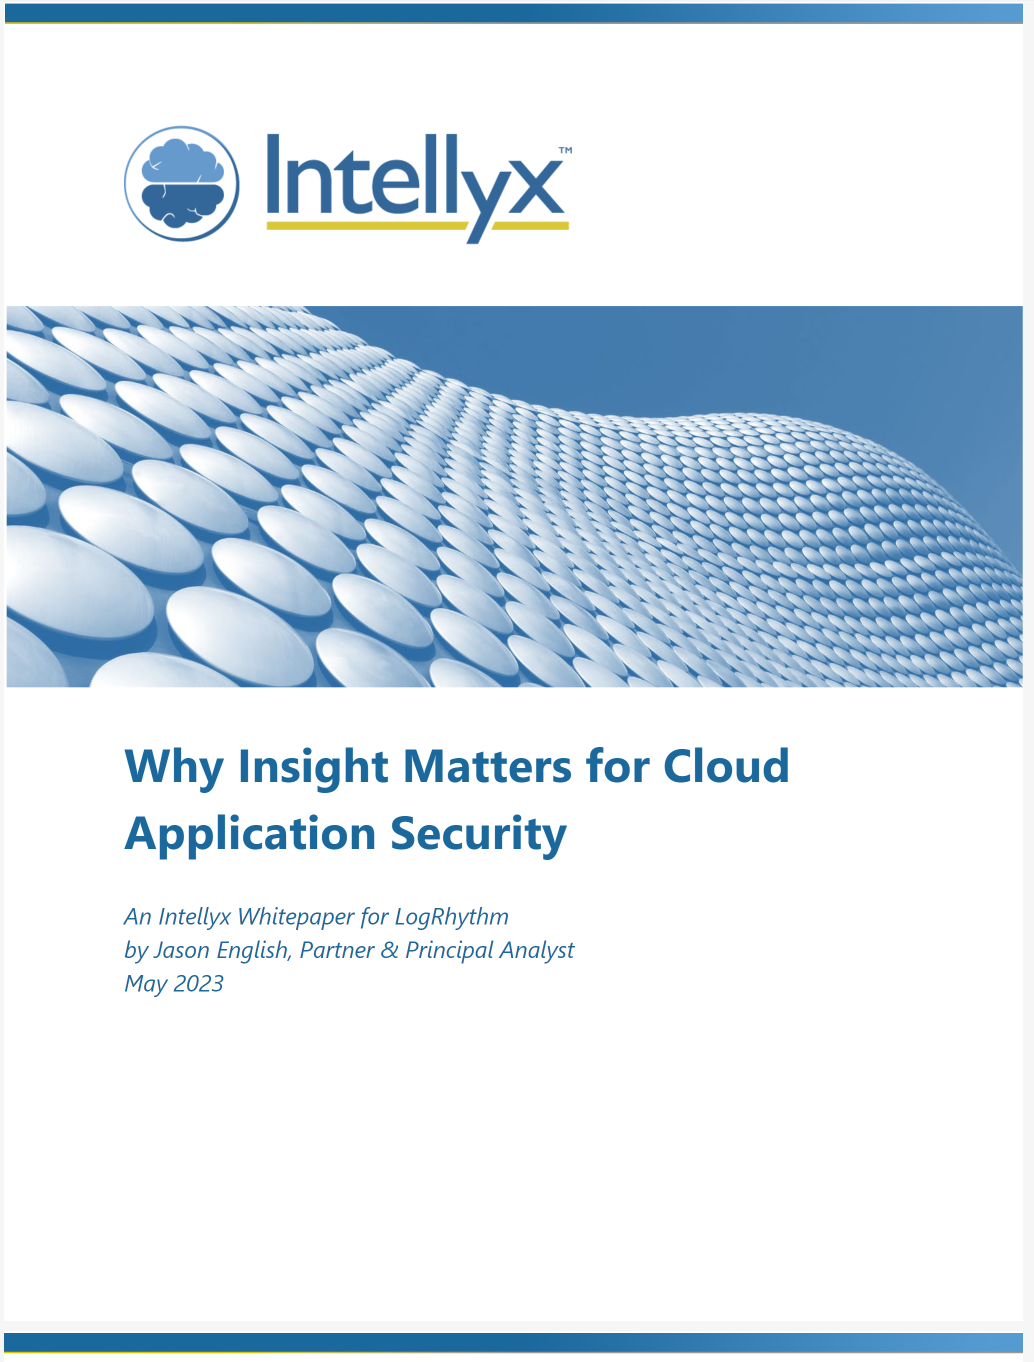 >Why Insight Matters for Cloud Application Security